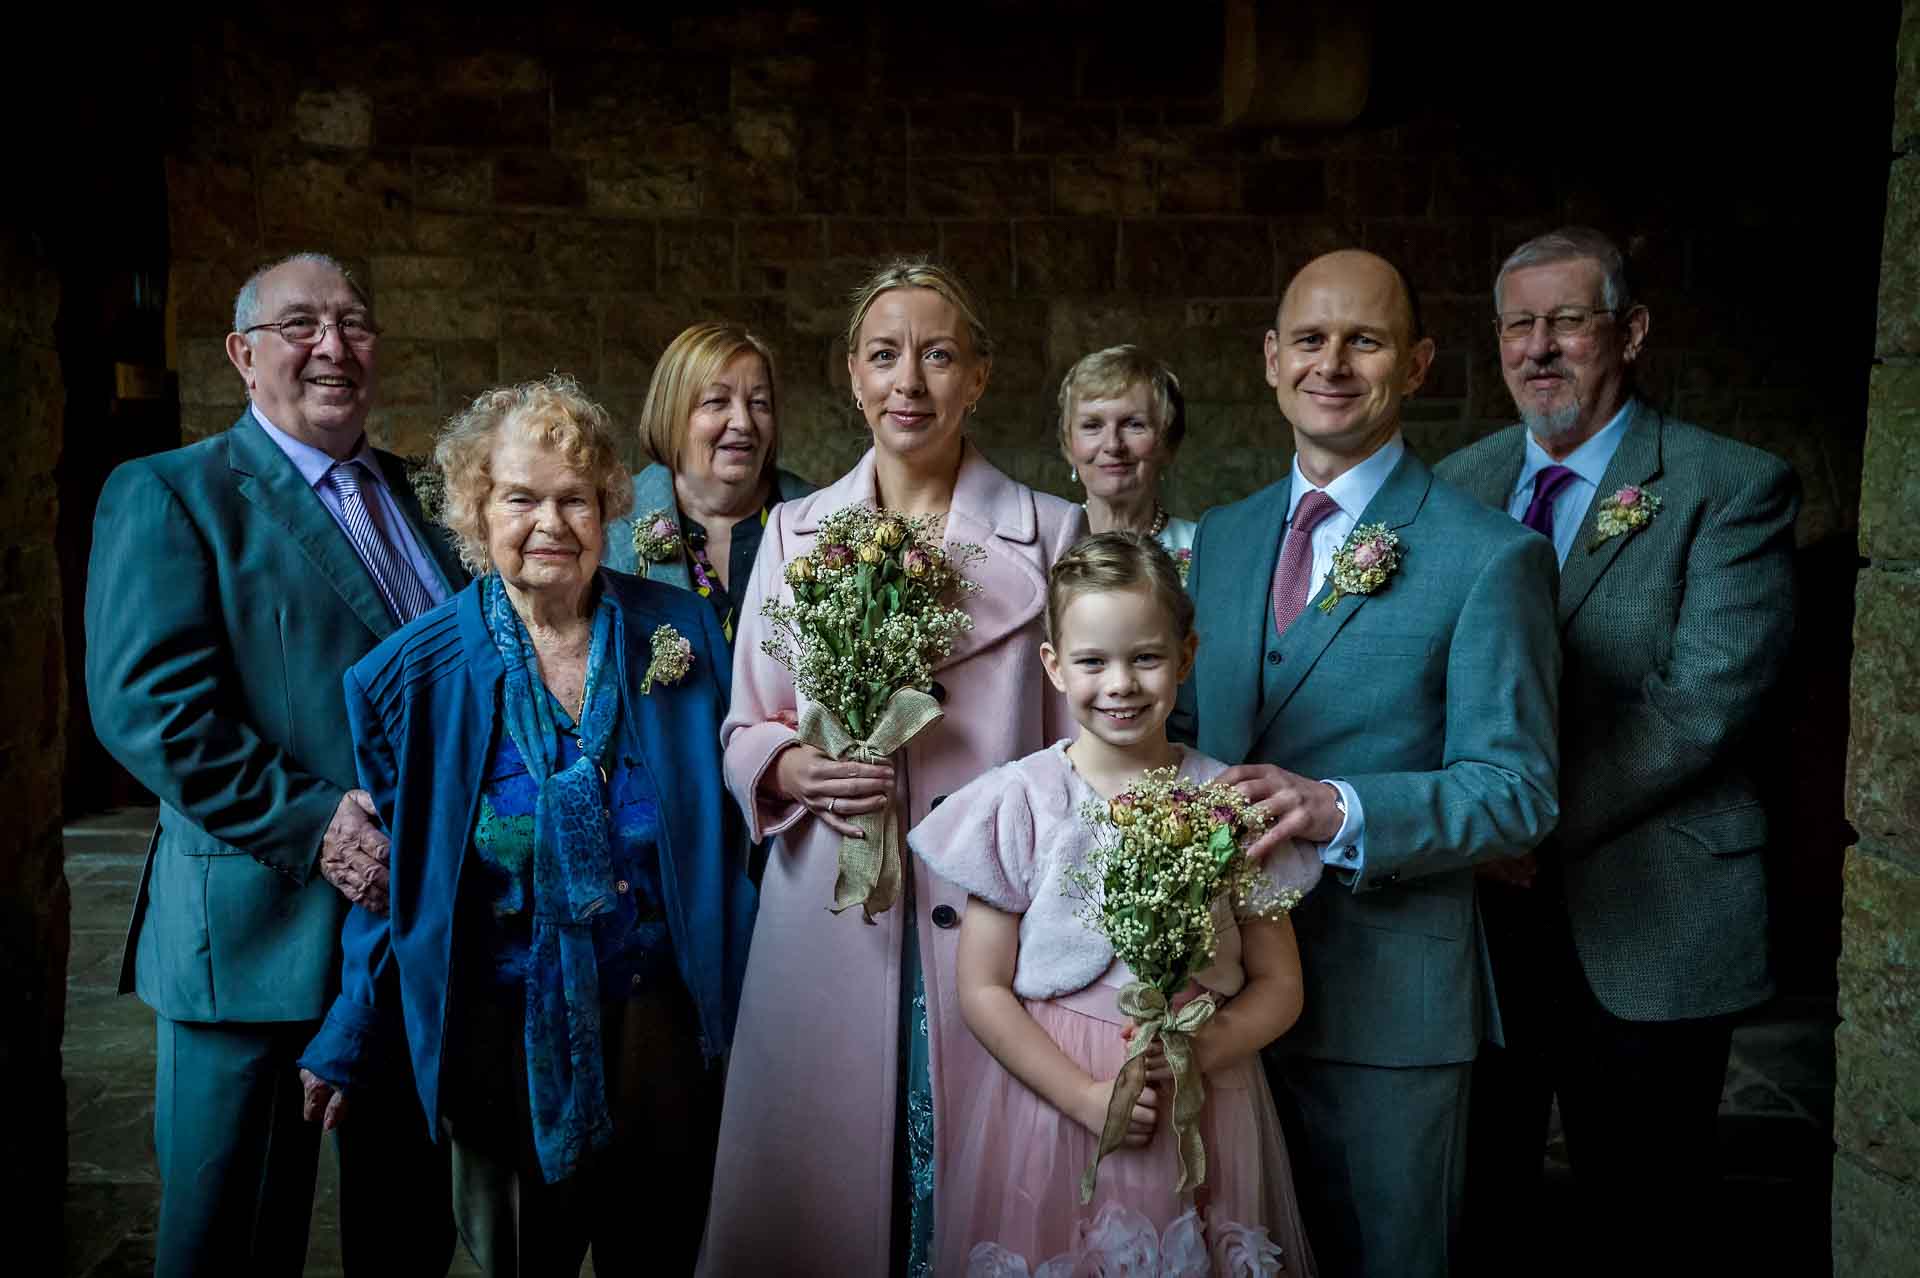 Family wedding portrait in subdued light taken at Castell Coch